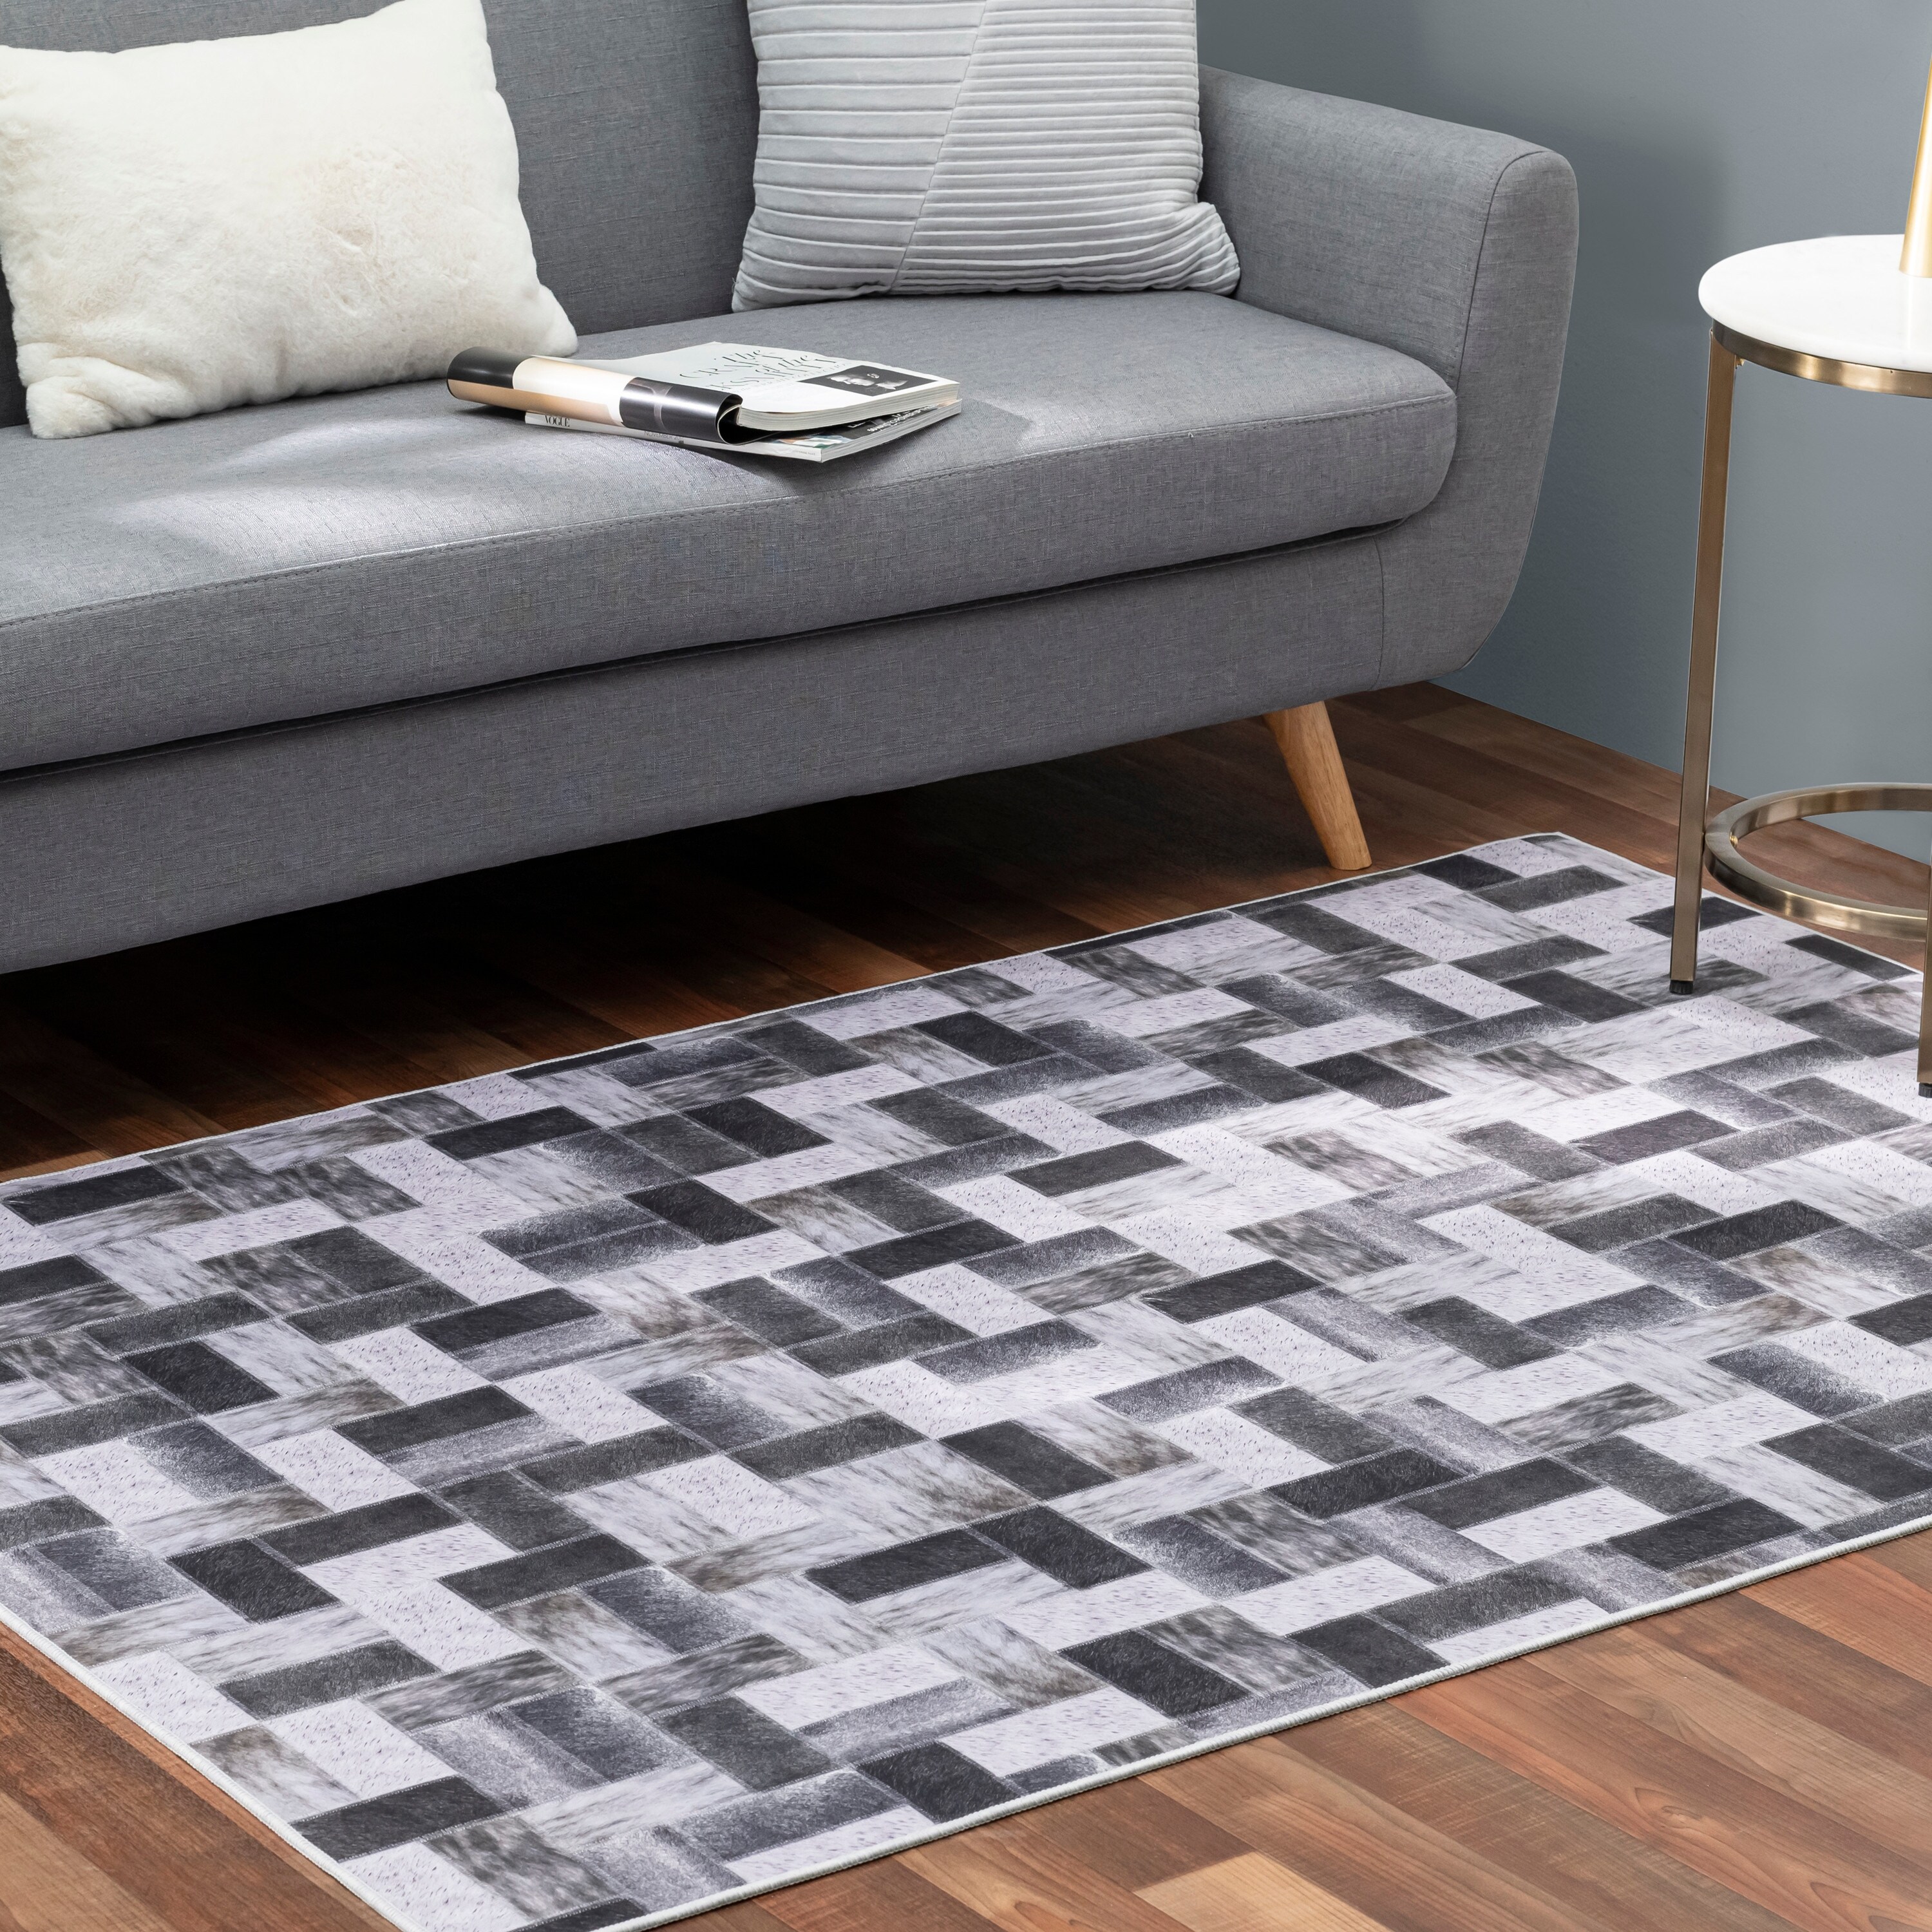 https://ak1.ostkcdn.com/images/products/is/images/direct/27d16c9dfa3c263ad9530c837723f7f85d226f37/Faux-Cowhide-Contemporary-Area-Rug-Patchwork-Off-the-Blocks-Polyester-Rug-With-Cotton-Canvas-Backing.jpg